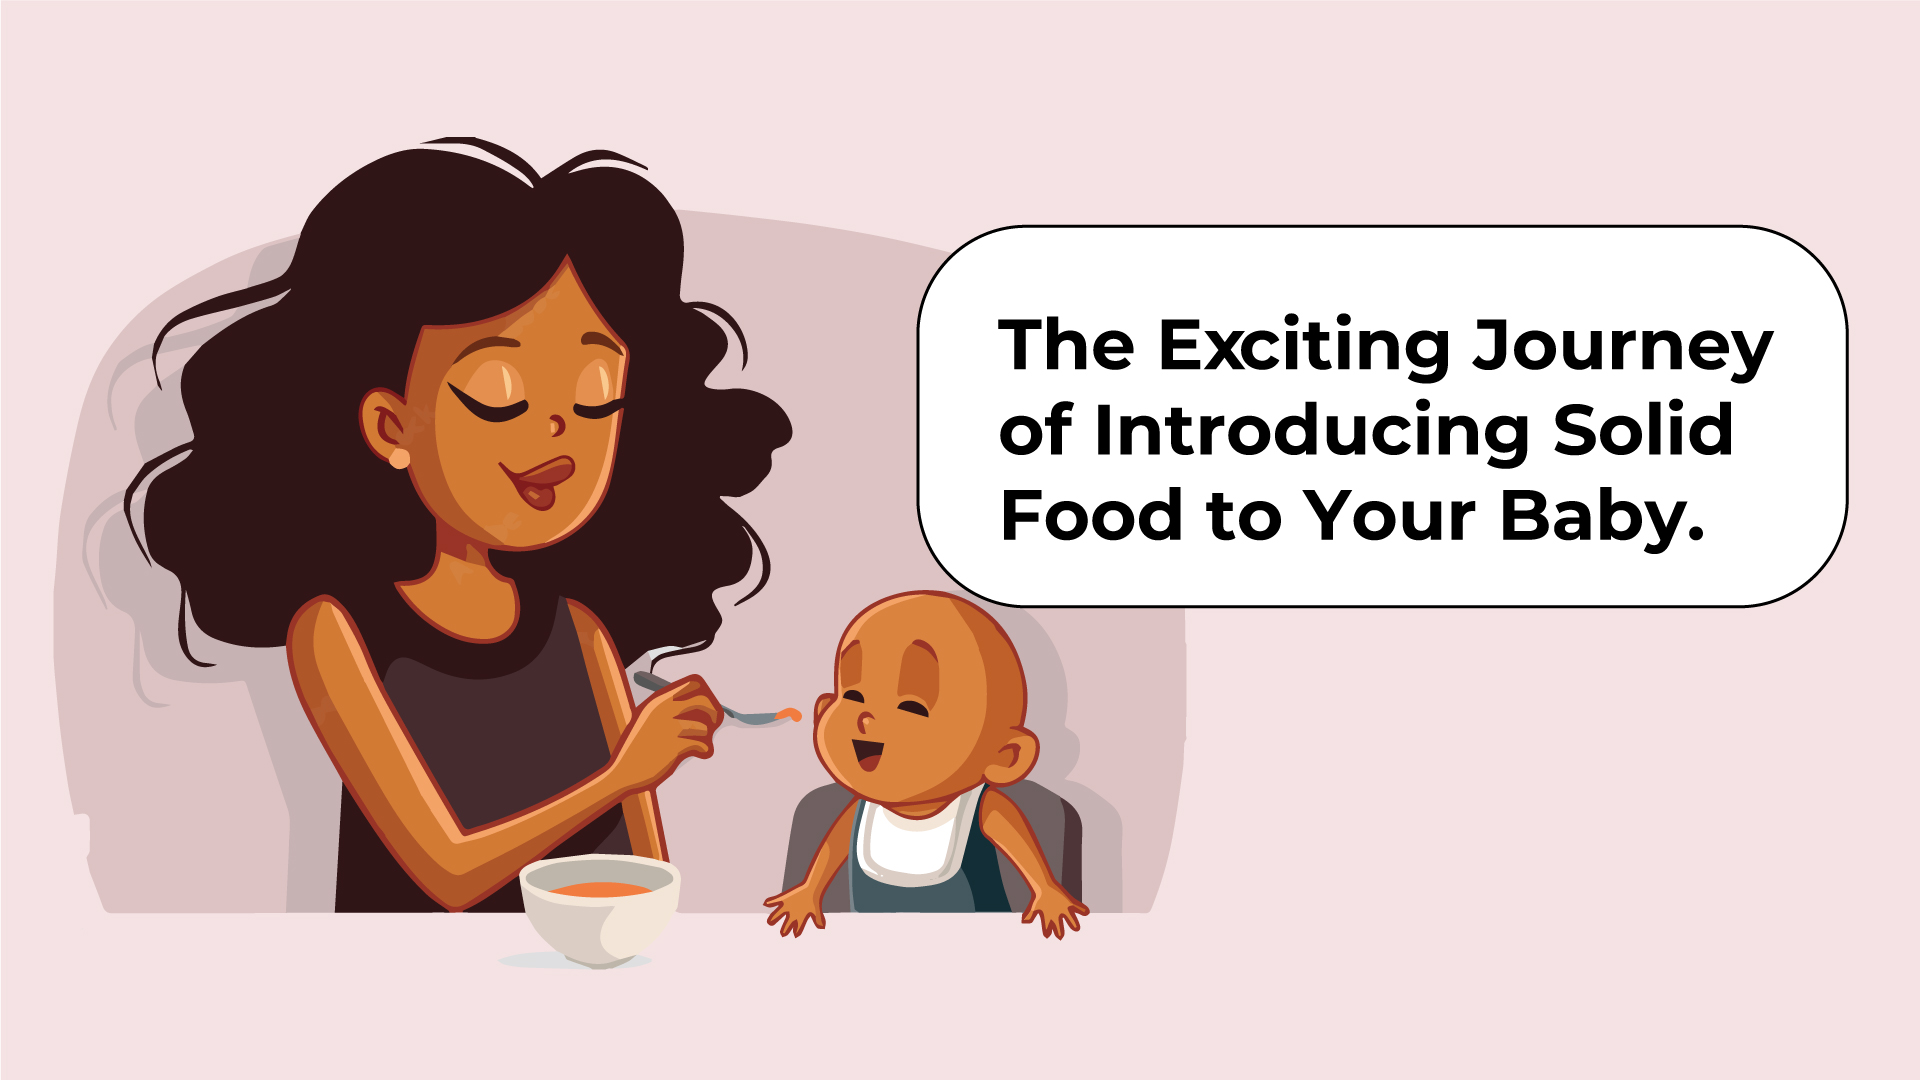 Introducing Solid Food to Your Baby